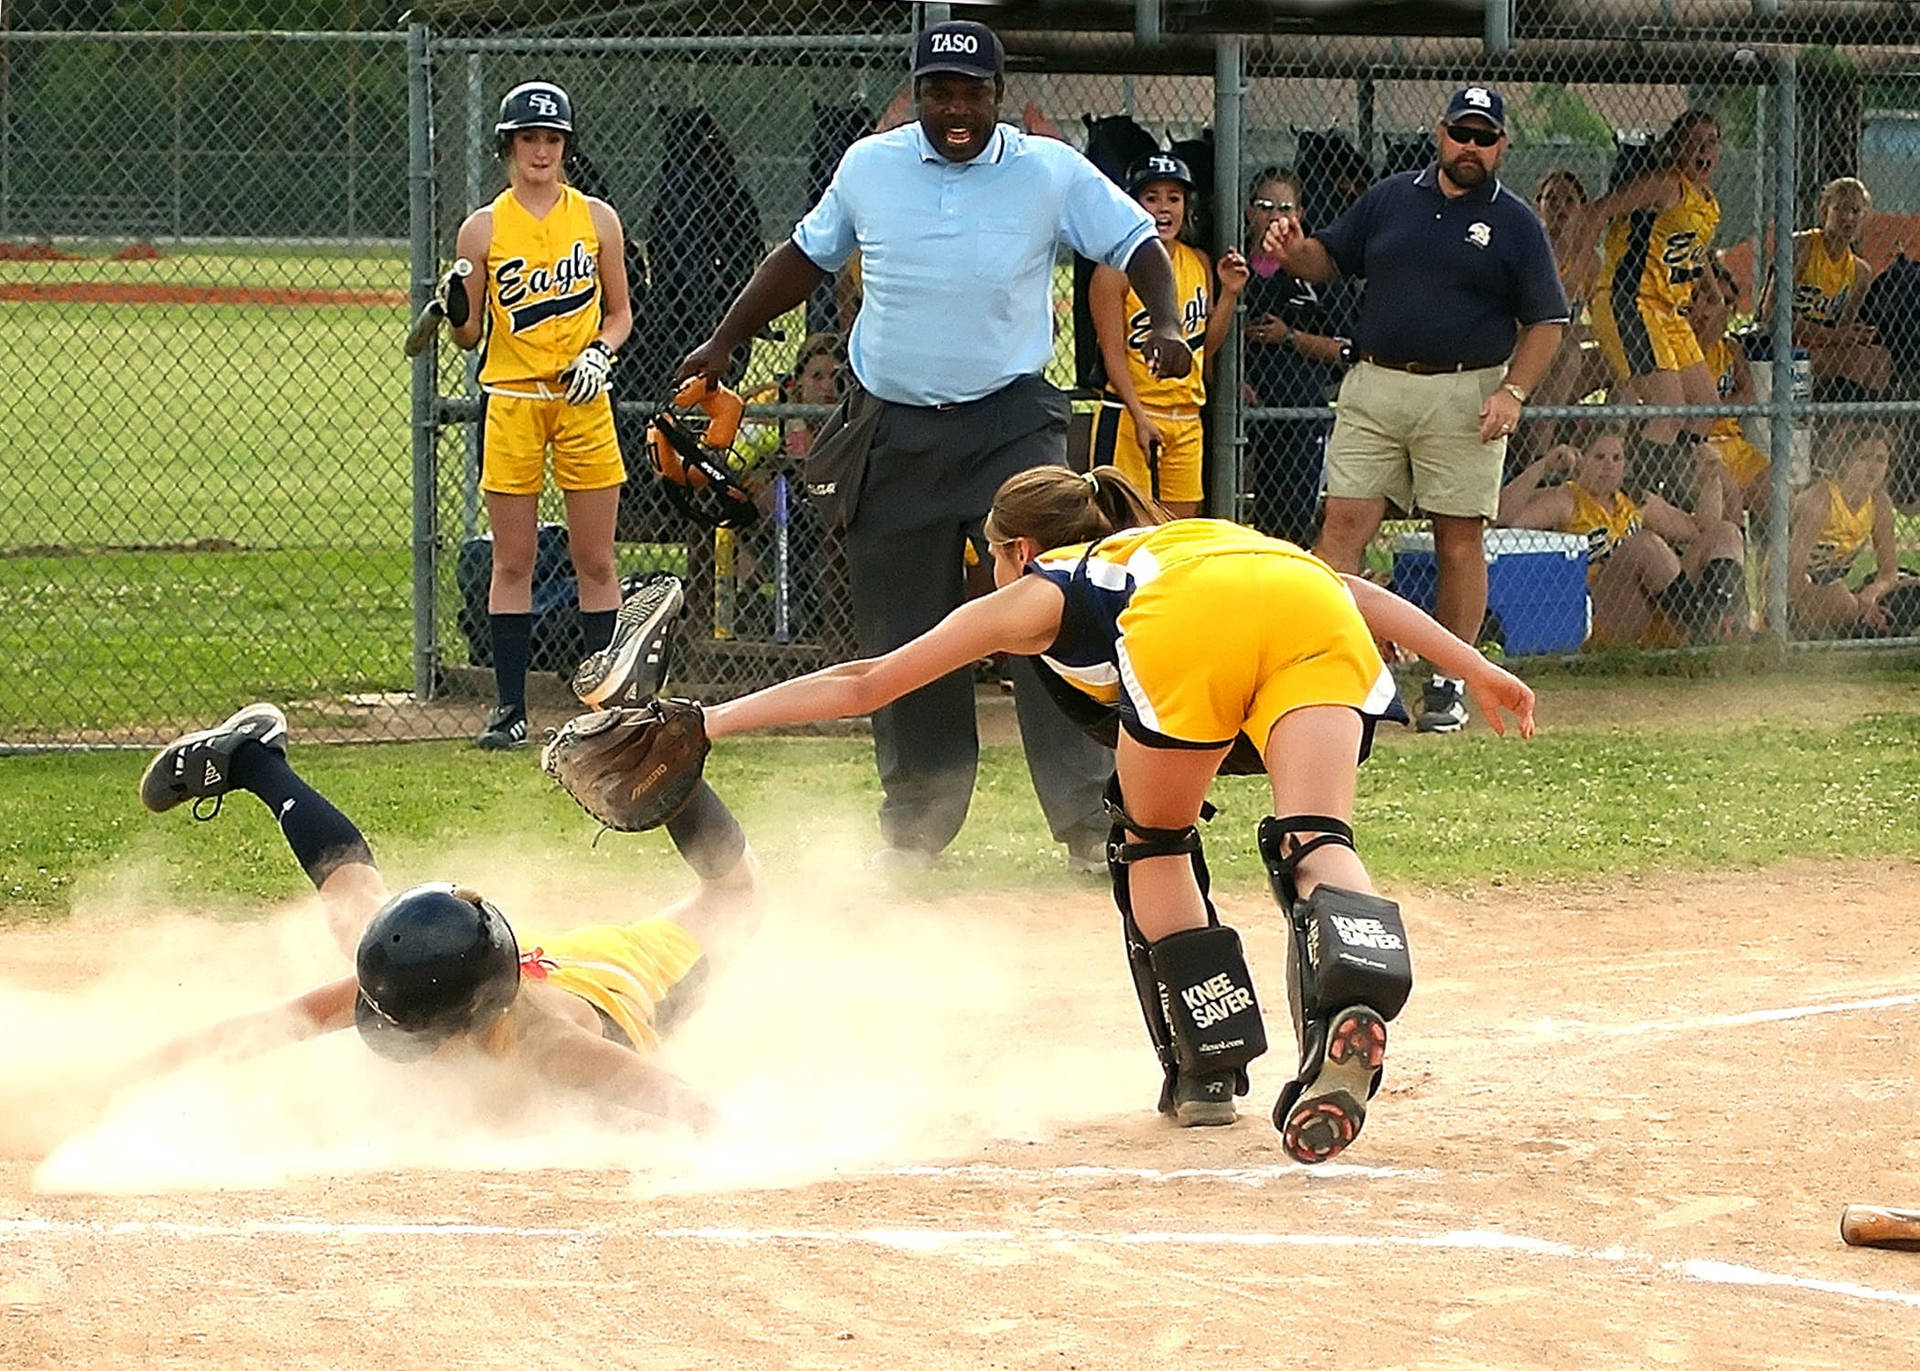 Softball Players In Action Wallpaper